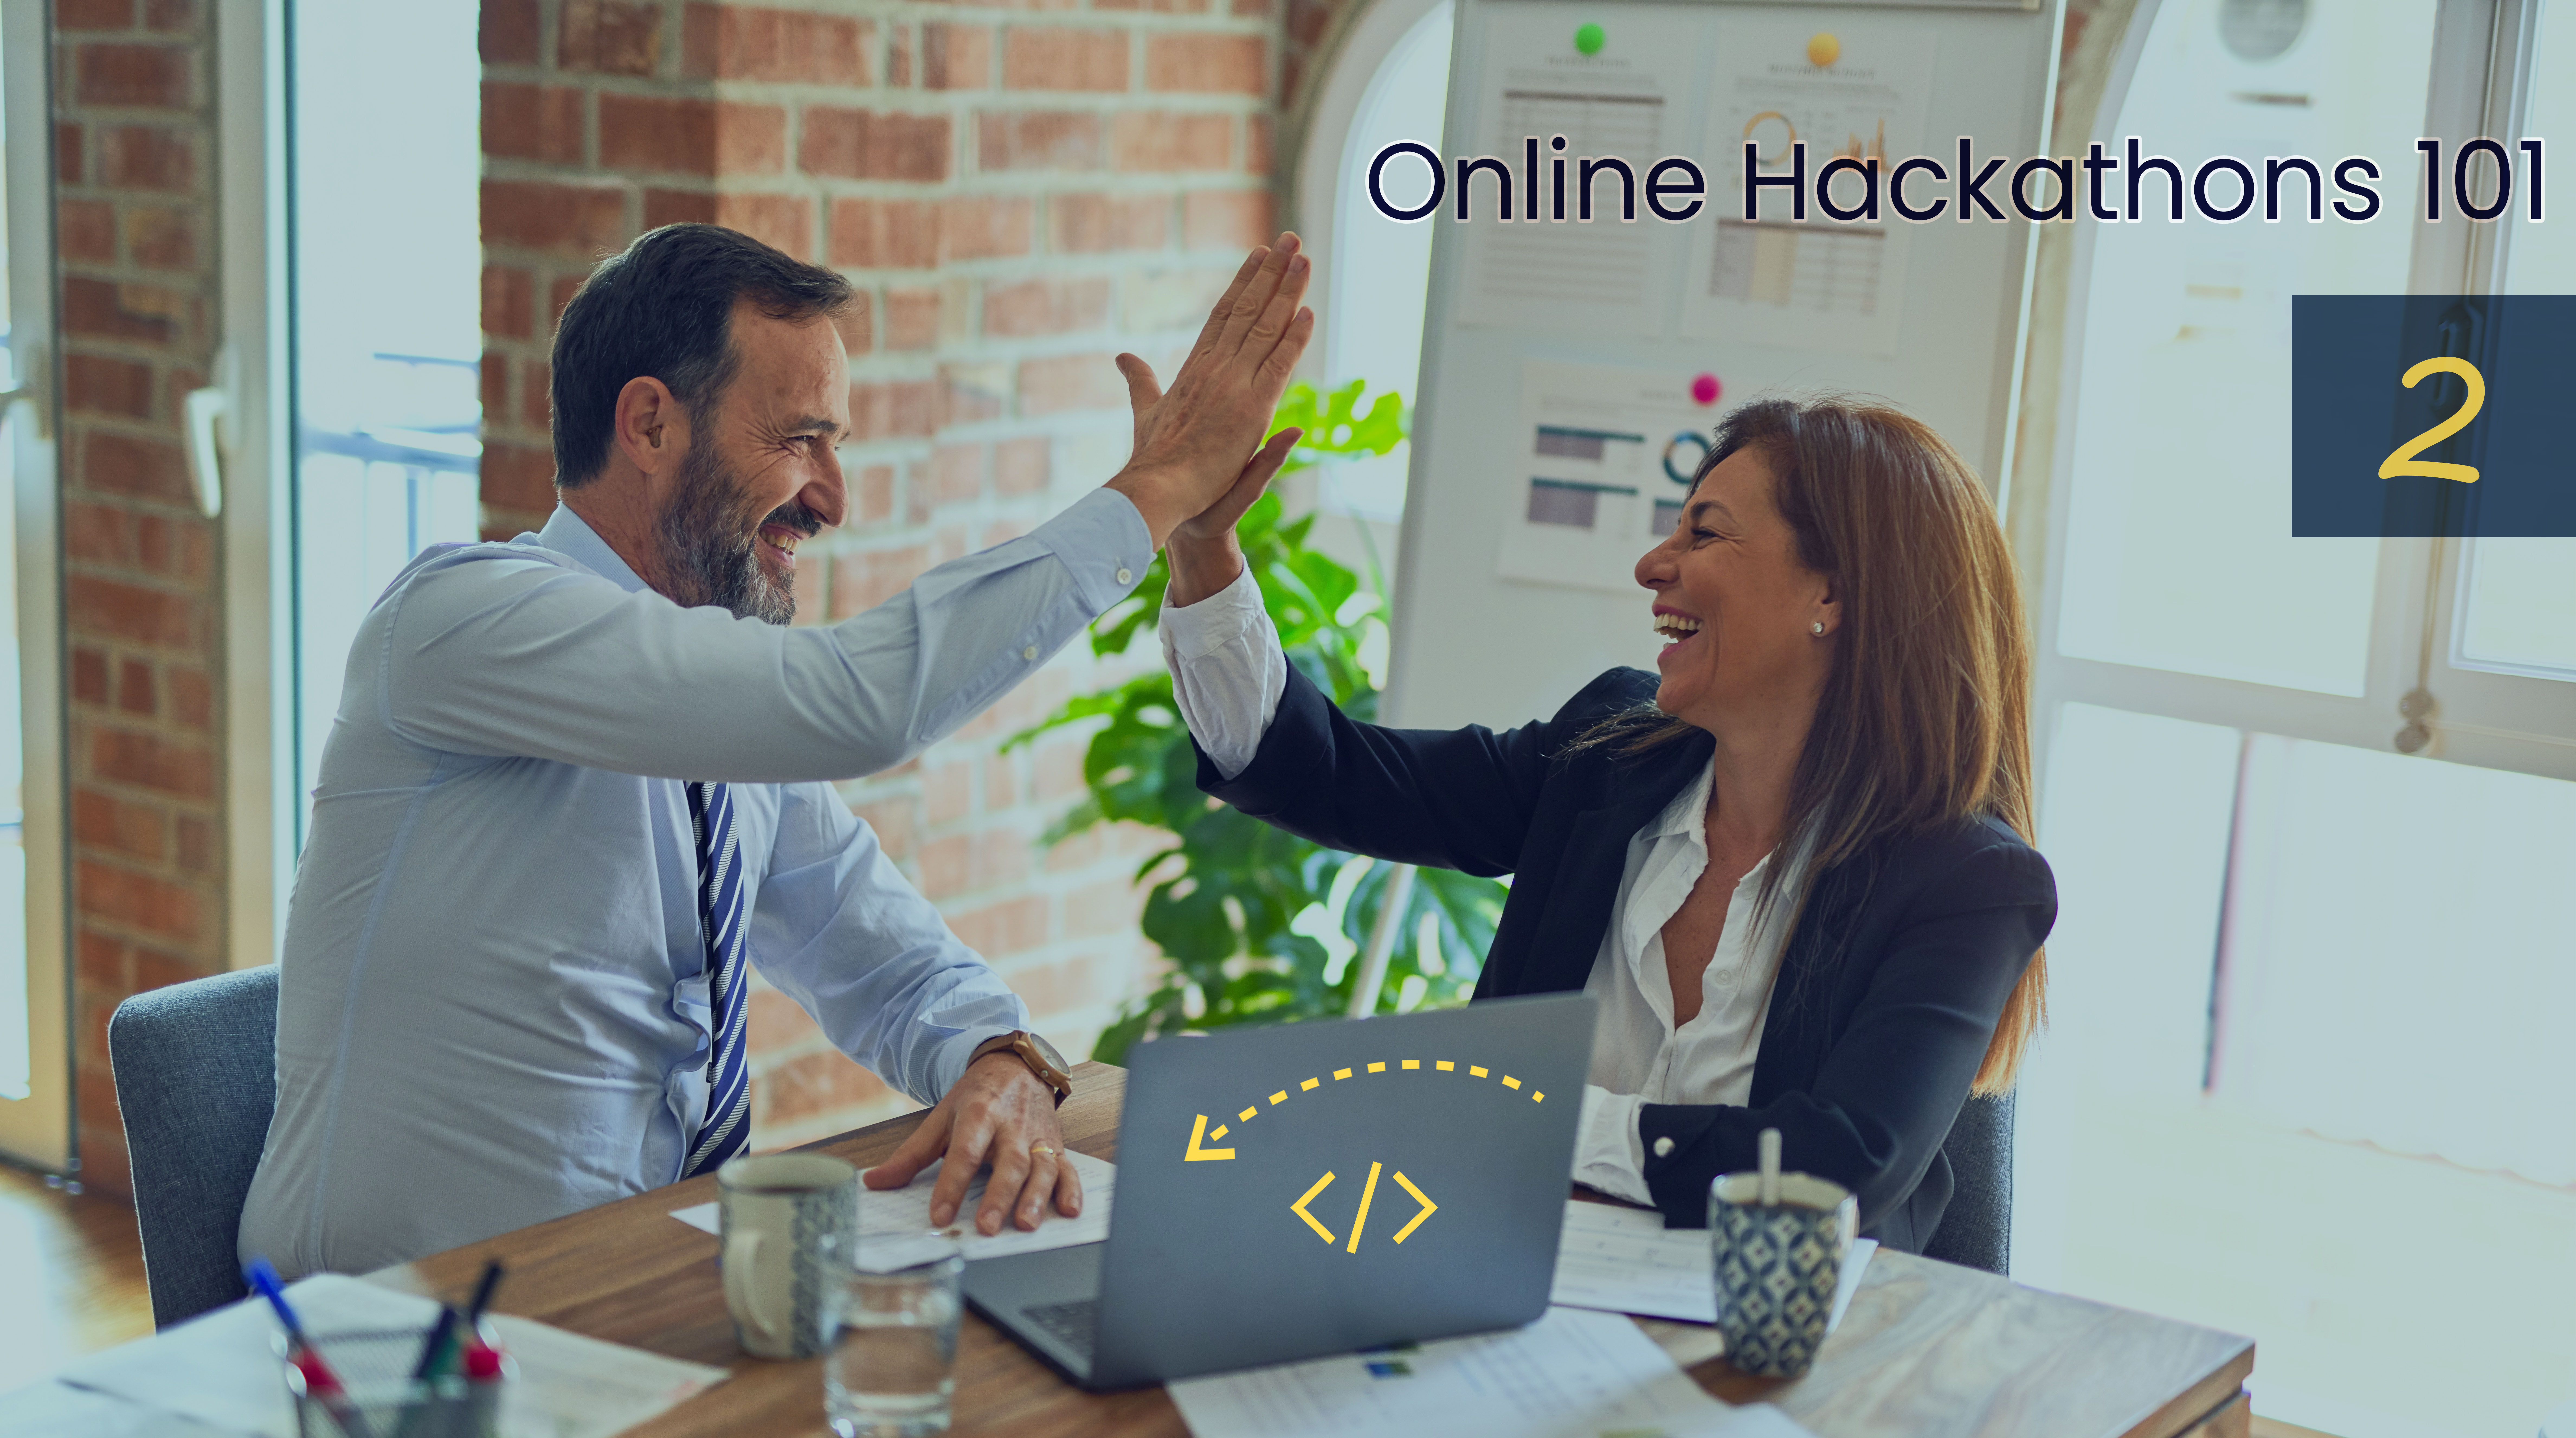 2 employees high five with online hackathons 101 text